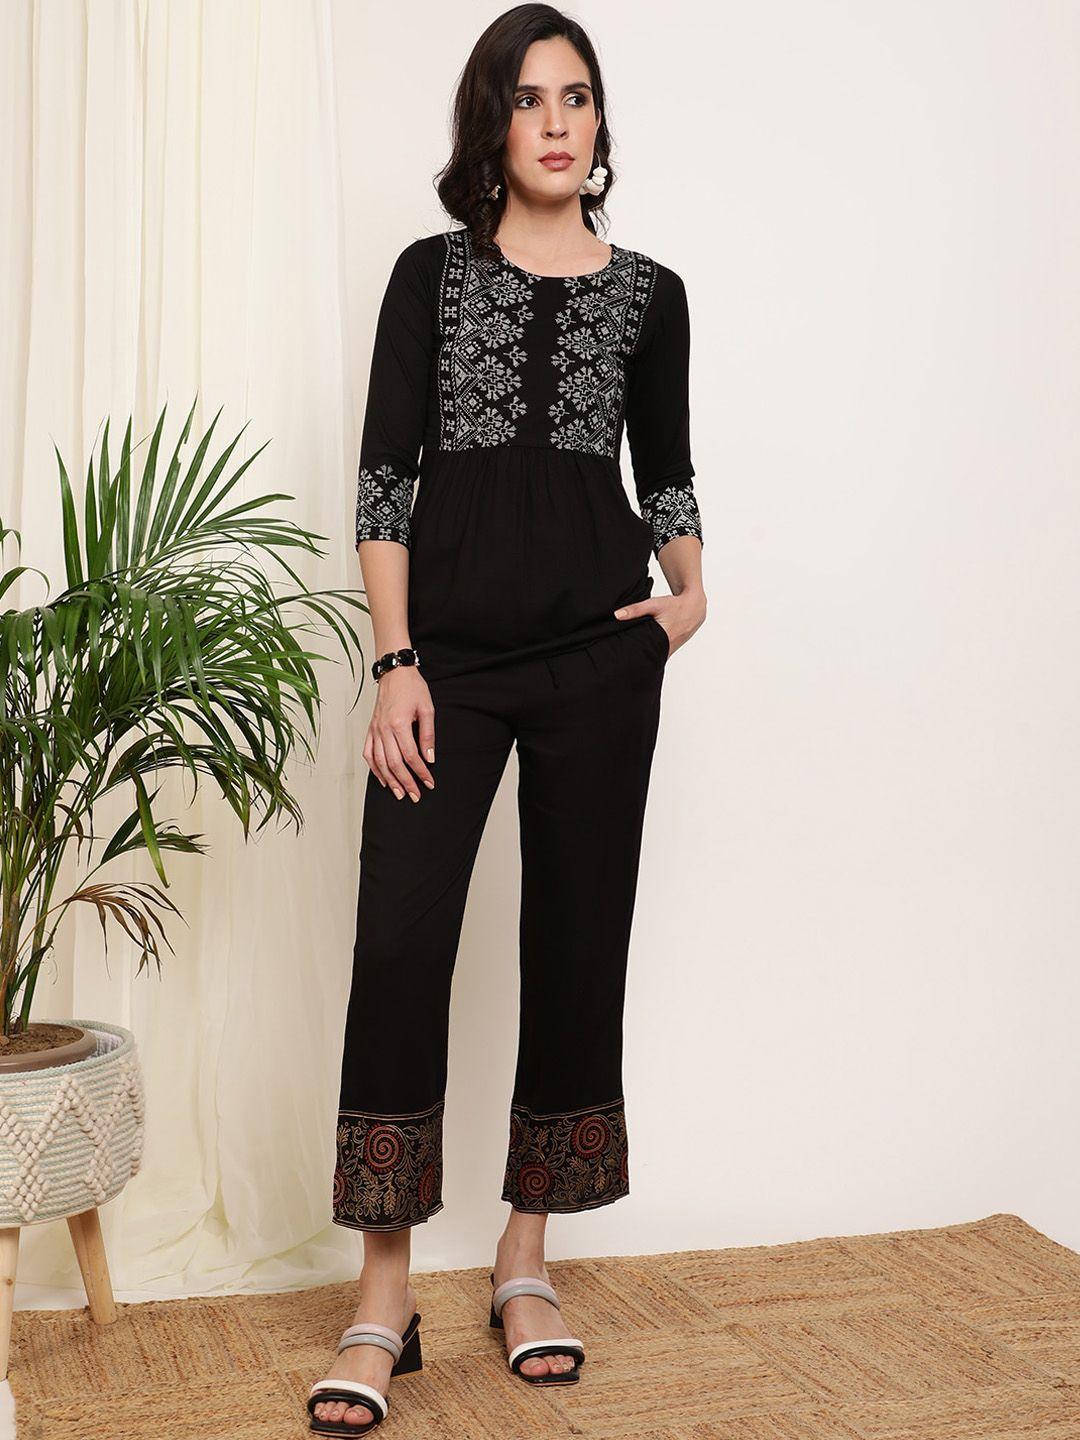 daevish printed top with trouser co-ords